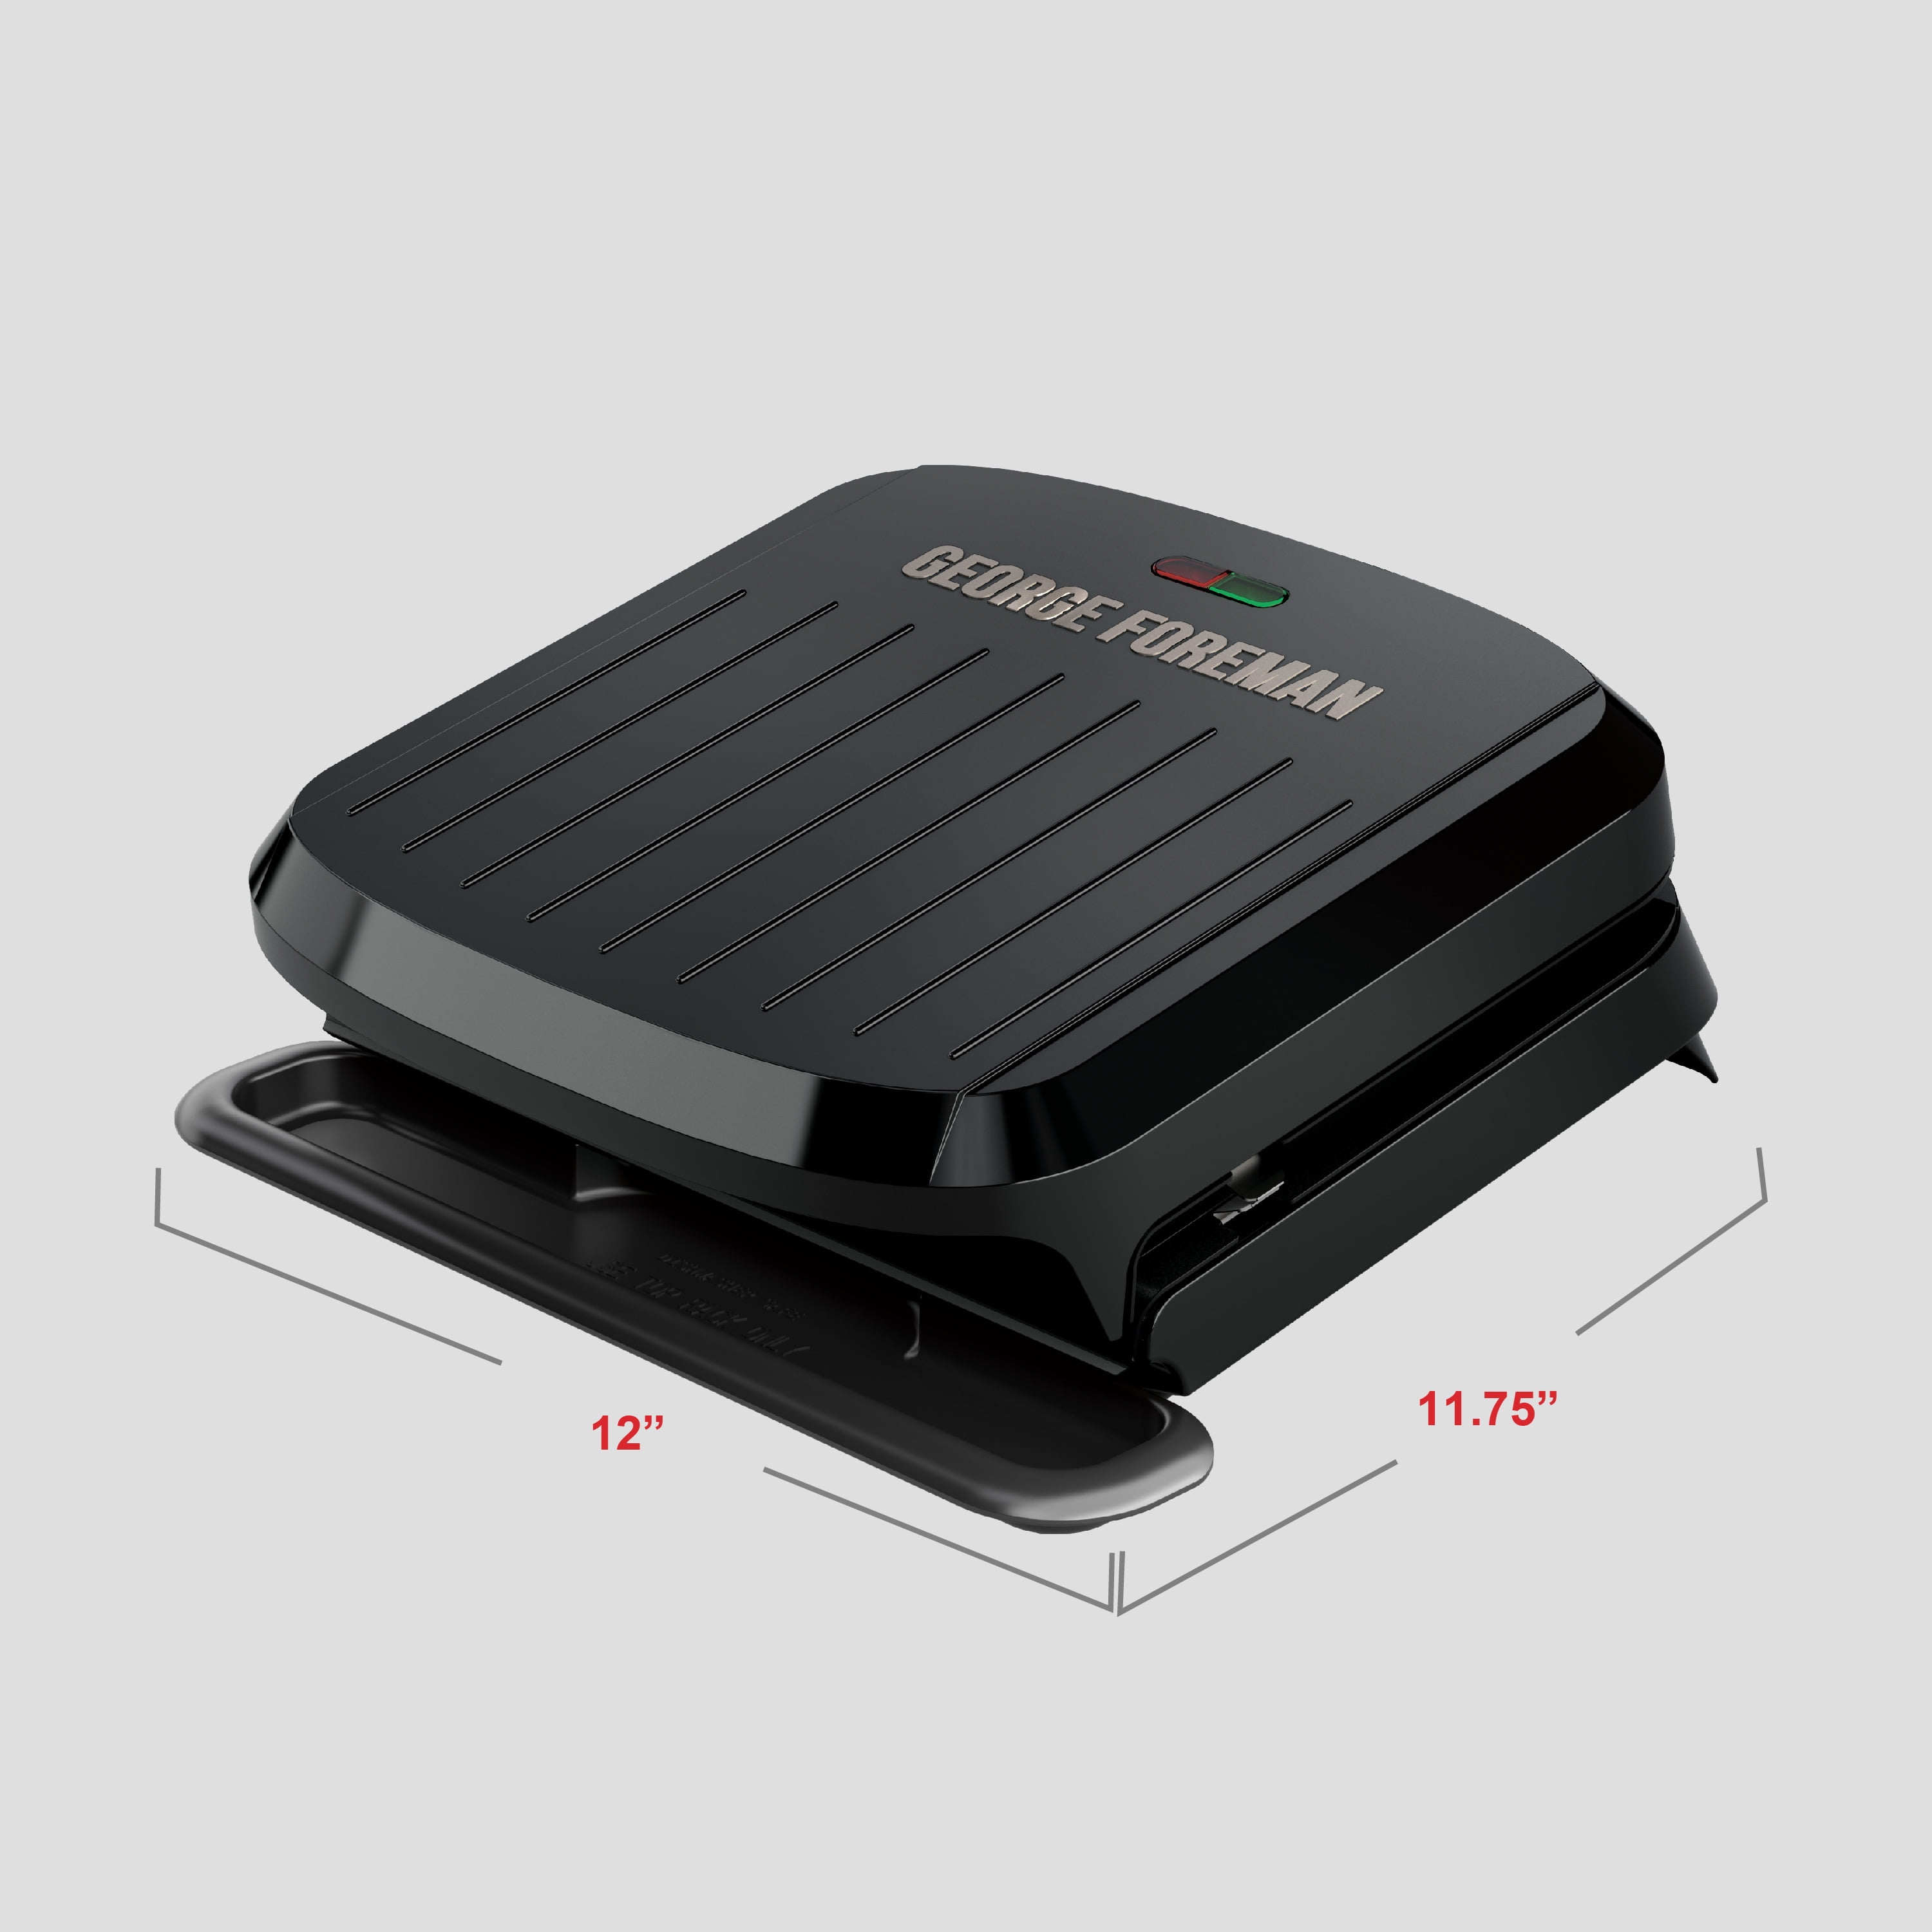 George Foreman 4-Serving Removable Plate Grill and Panini, Black, GRP1065B - 1